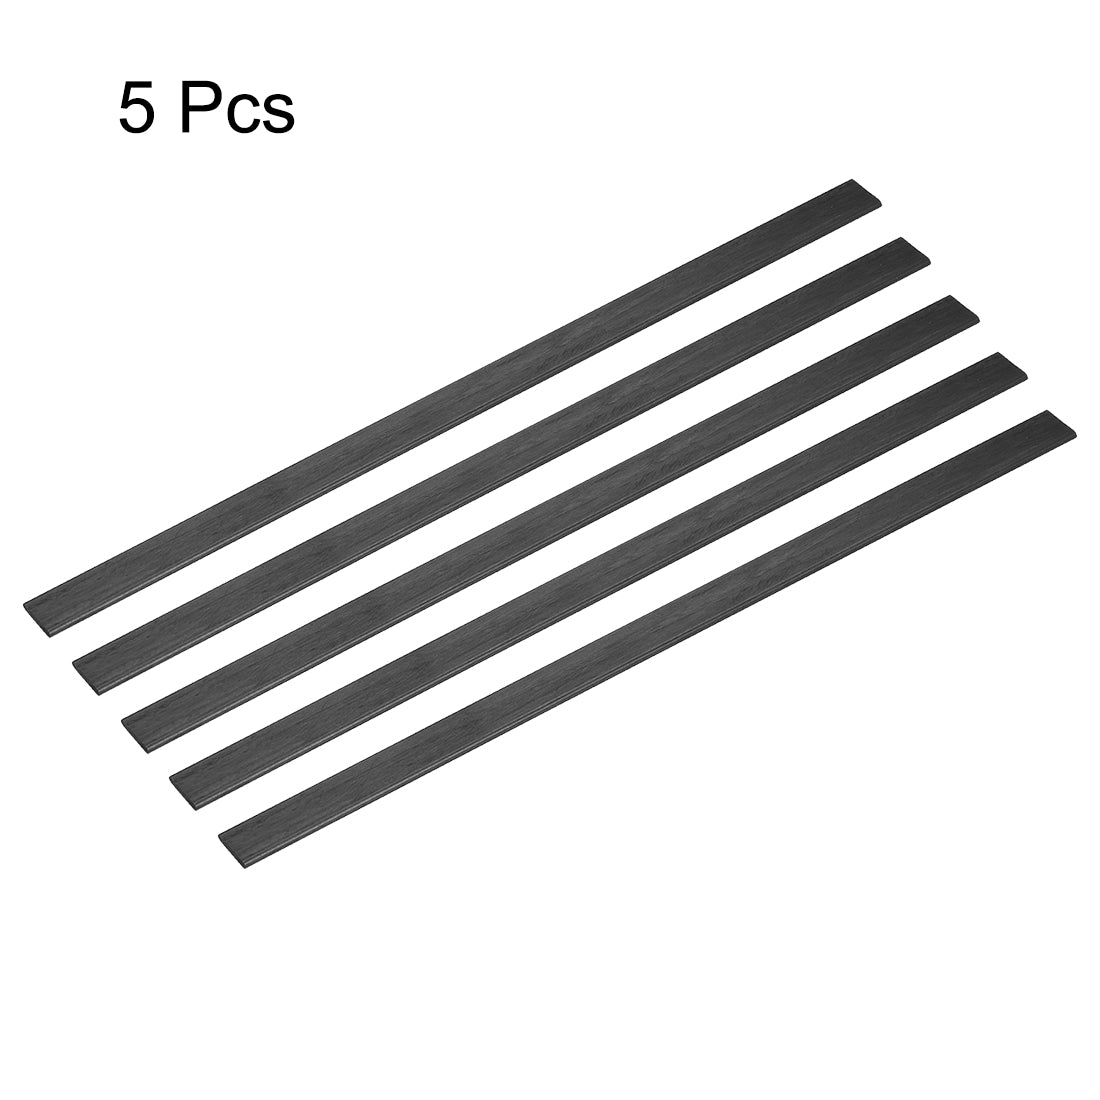 uxcell Uxcell Carbon Fiber Strip Bars 2x10mm 200mm Length Pultruded Carbon Fiber Strips for Kites, RC Airplane 5 Pcs